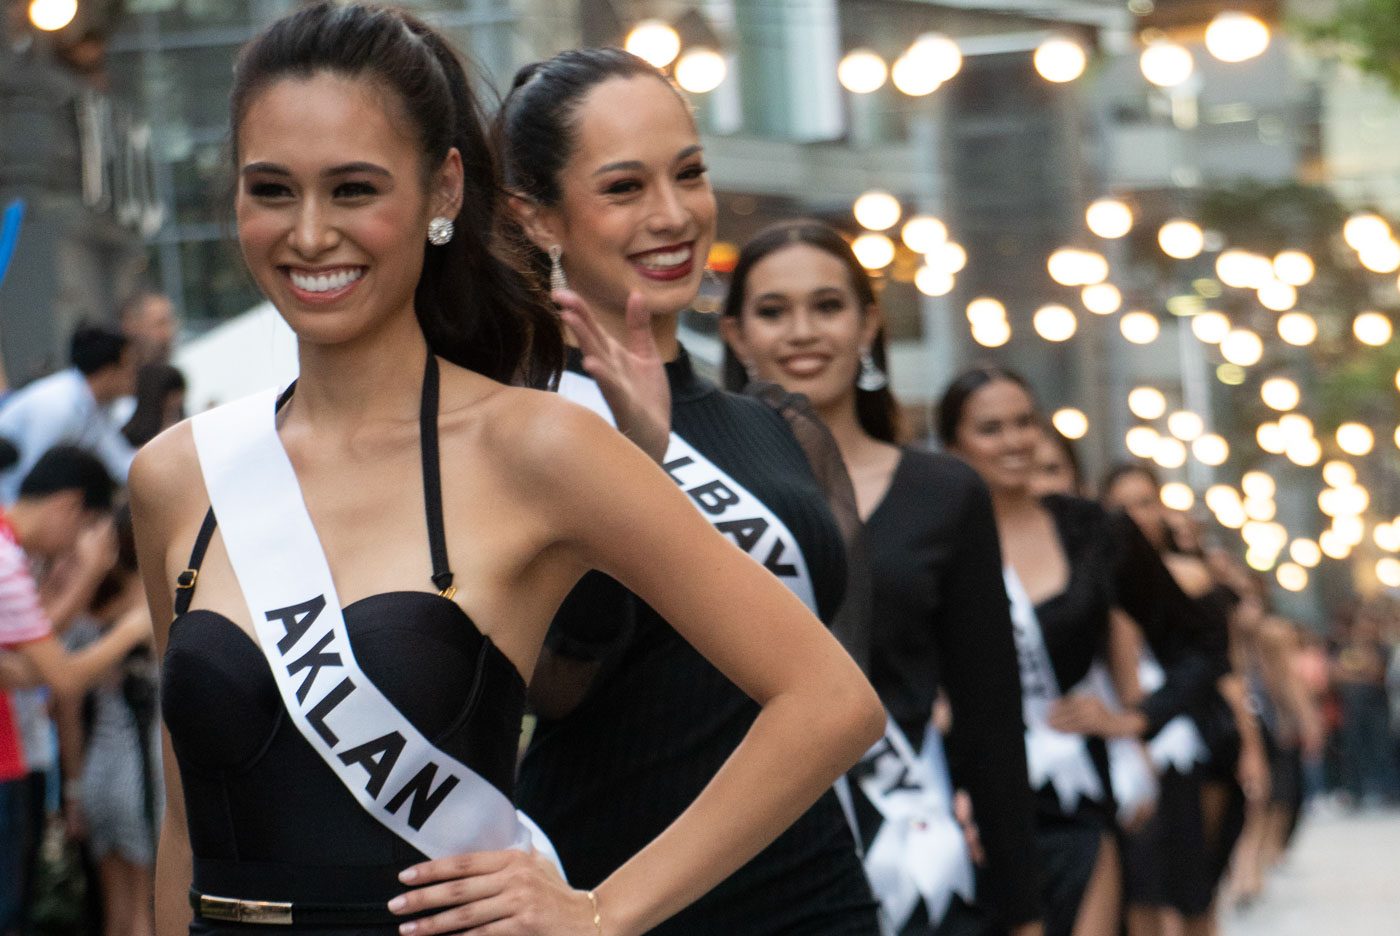 Miss Universe Philippines 2020 pageant night moved to October